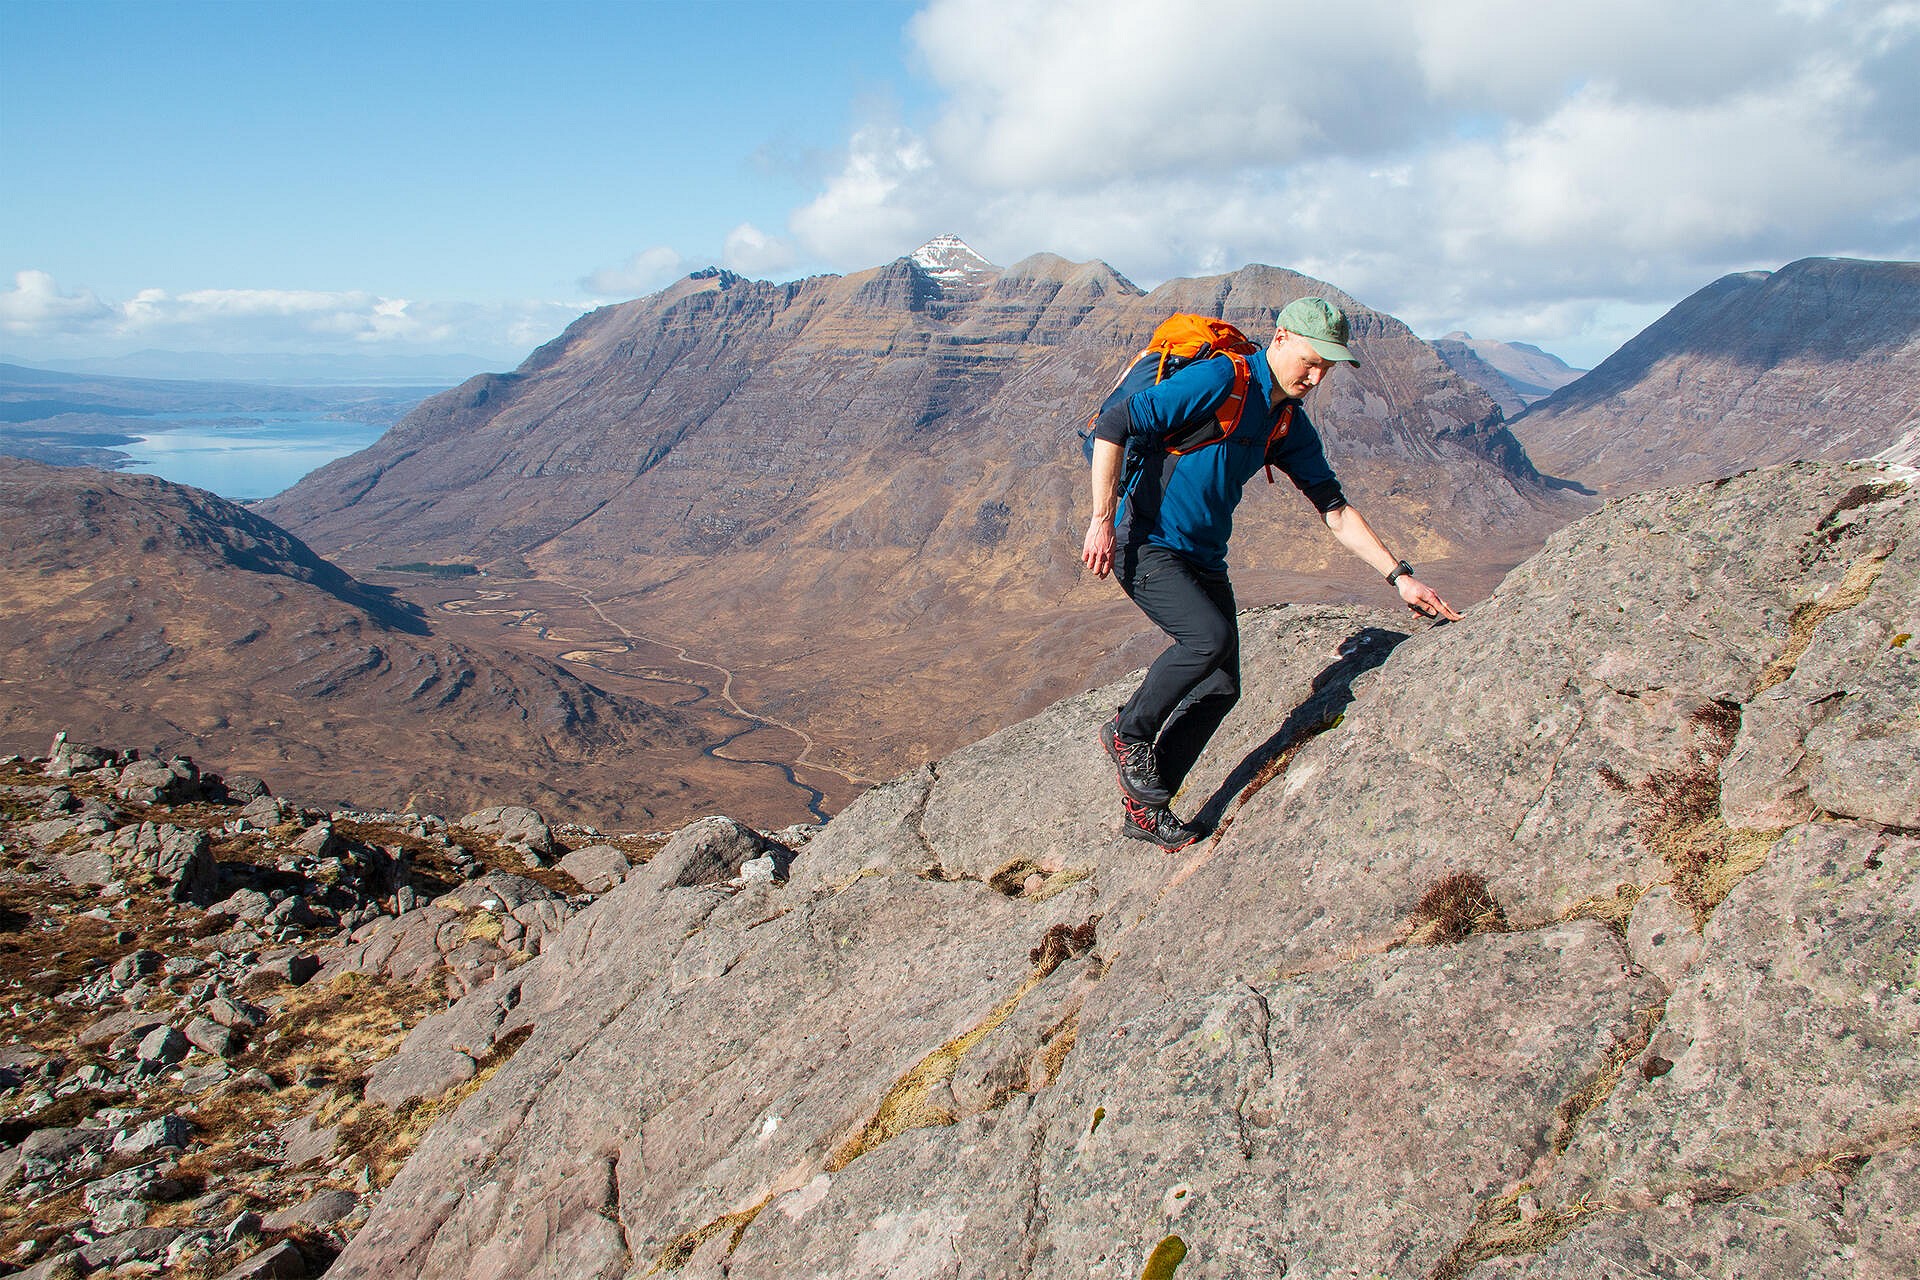 Tough but slightly stretchy fabric is spot on for walking and scrambling   © Dan Bailey